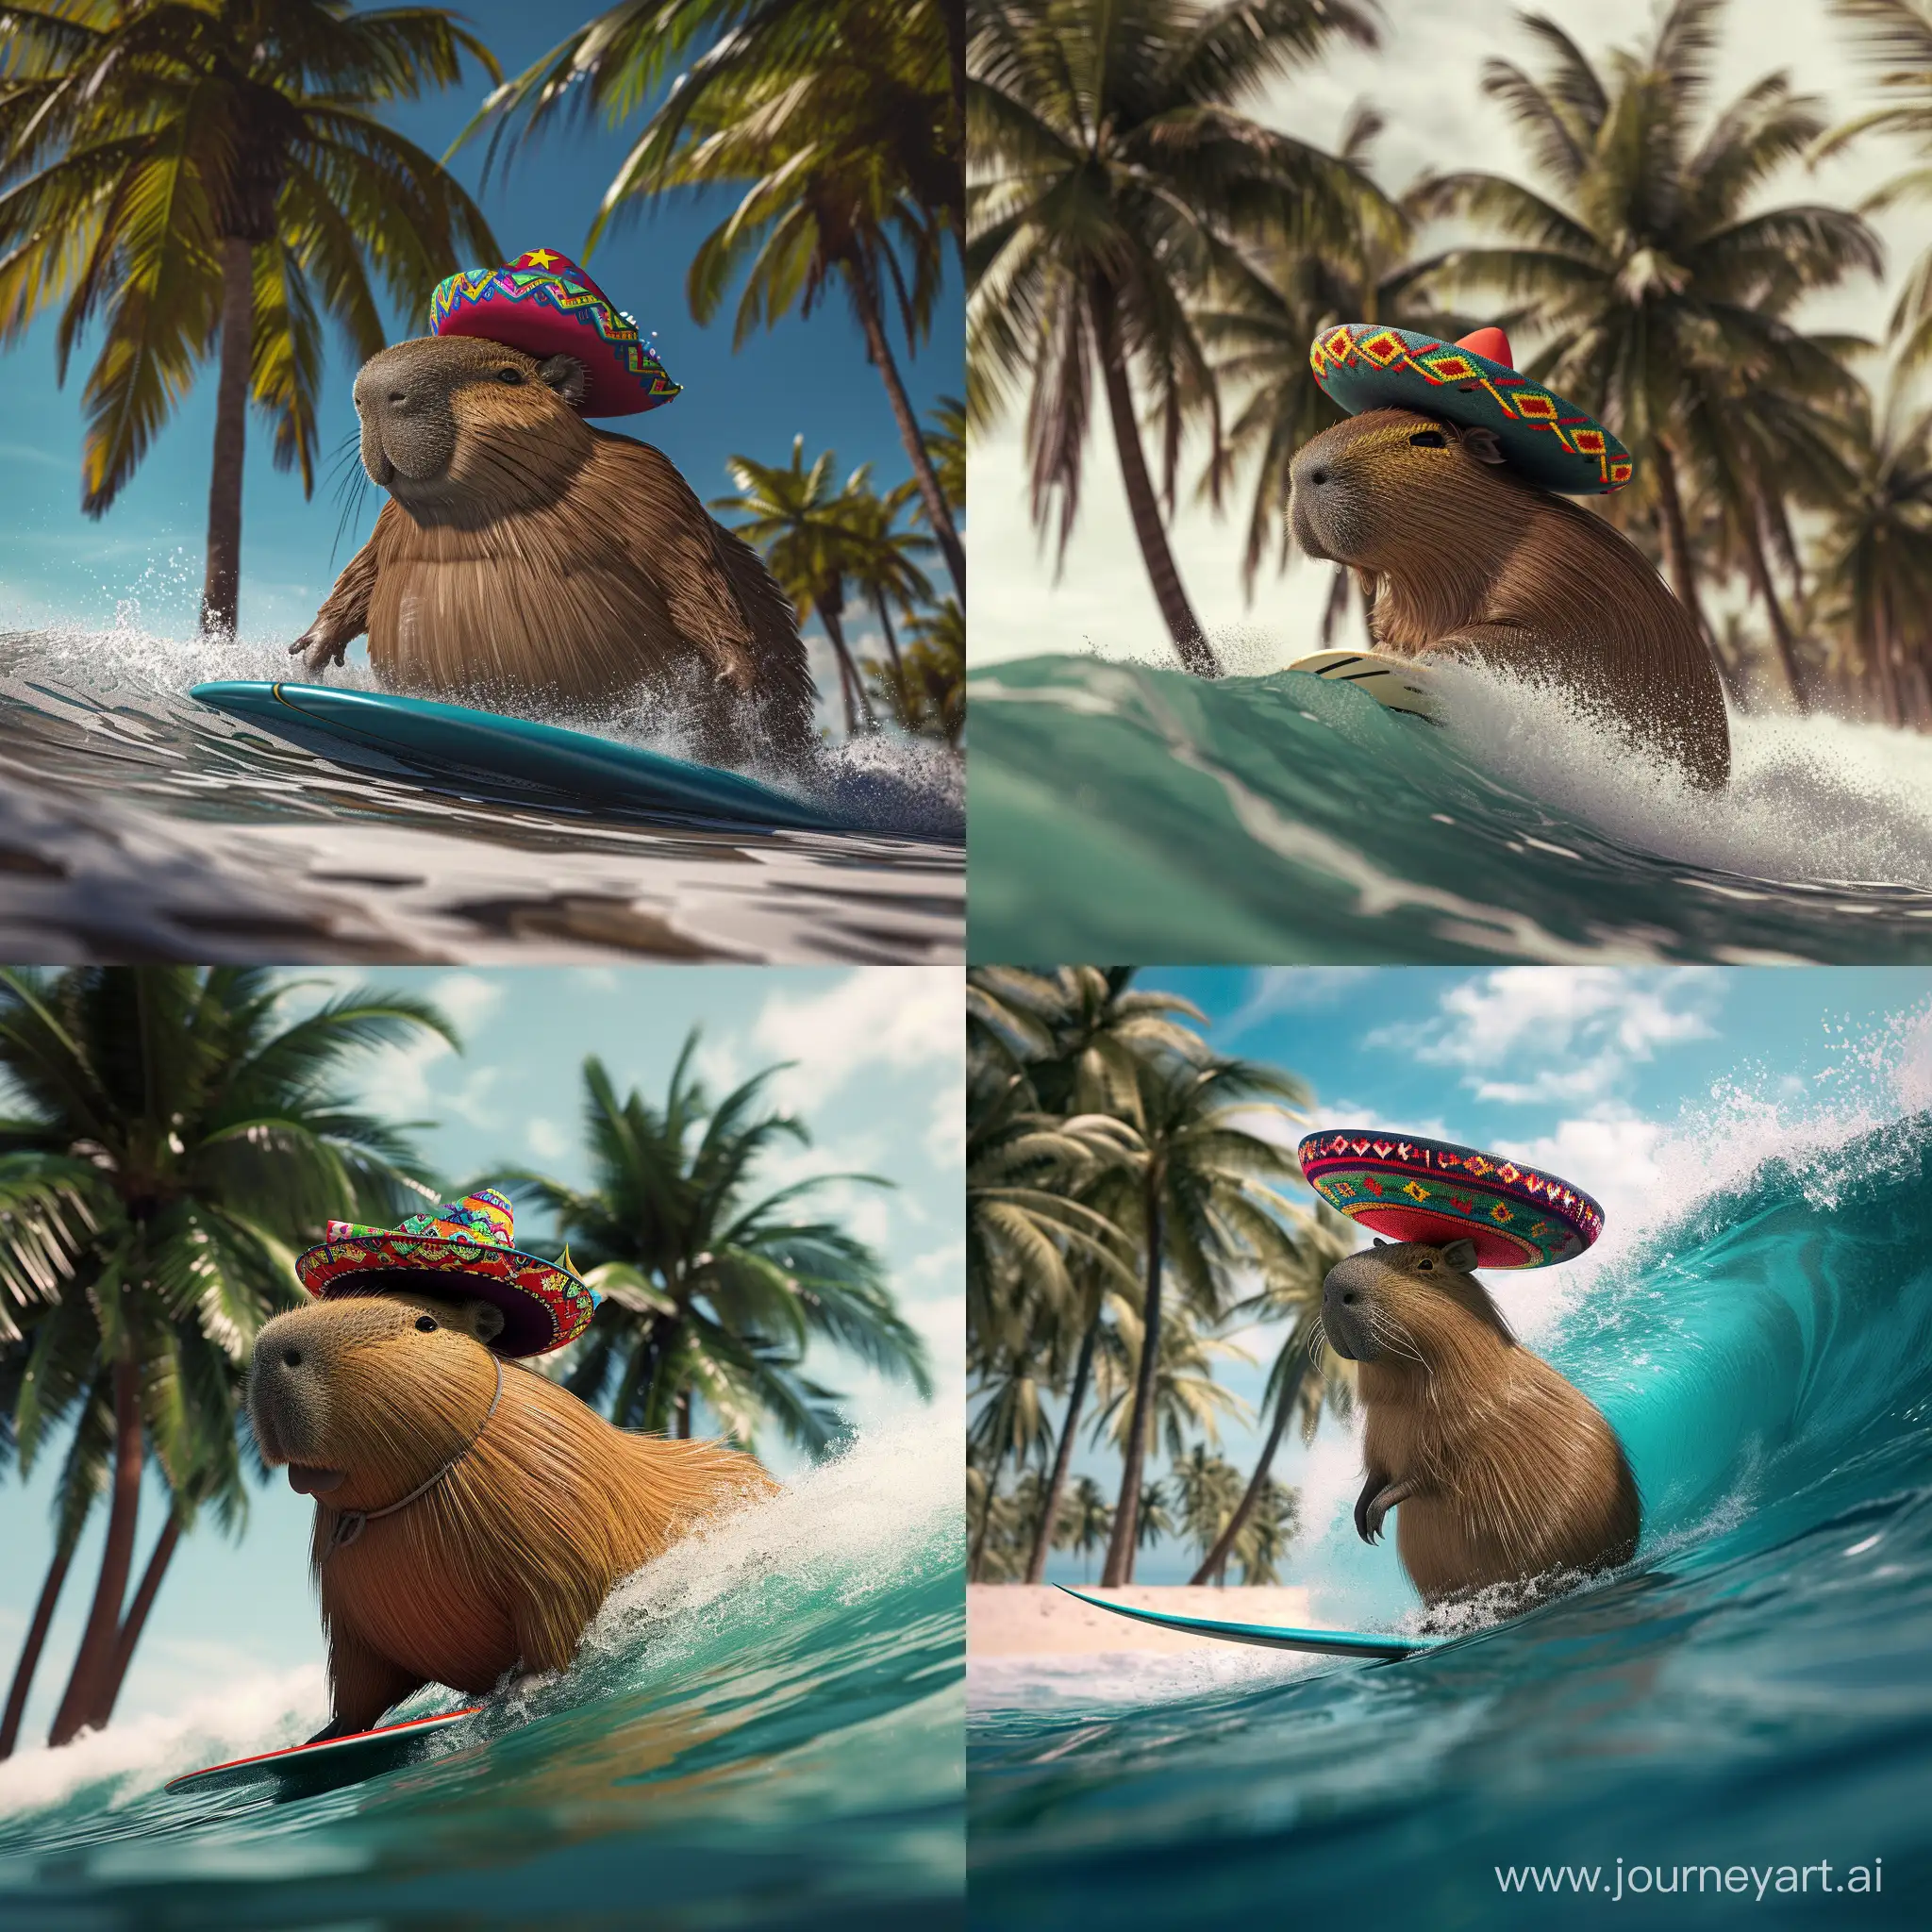 A delightful bright sight on a tropical beach and a realistic fat happy capybara, He surfing on a big wave with colorful Mexican sombrero hat on its head. Palm trees provide the perfect backdrop for this unique encounter. , creating a playfulness to the serene atmosphere. Photo that take with sony a7iii with 50mm lens